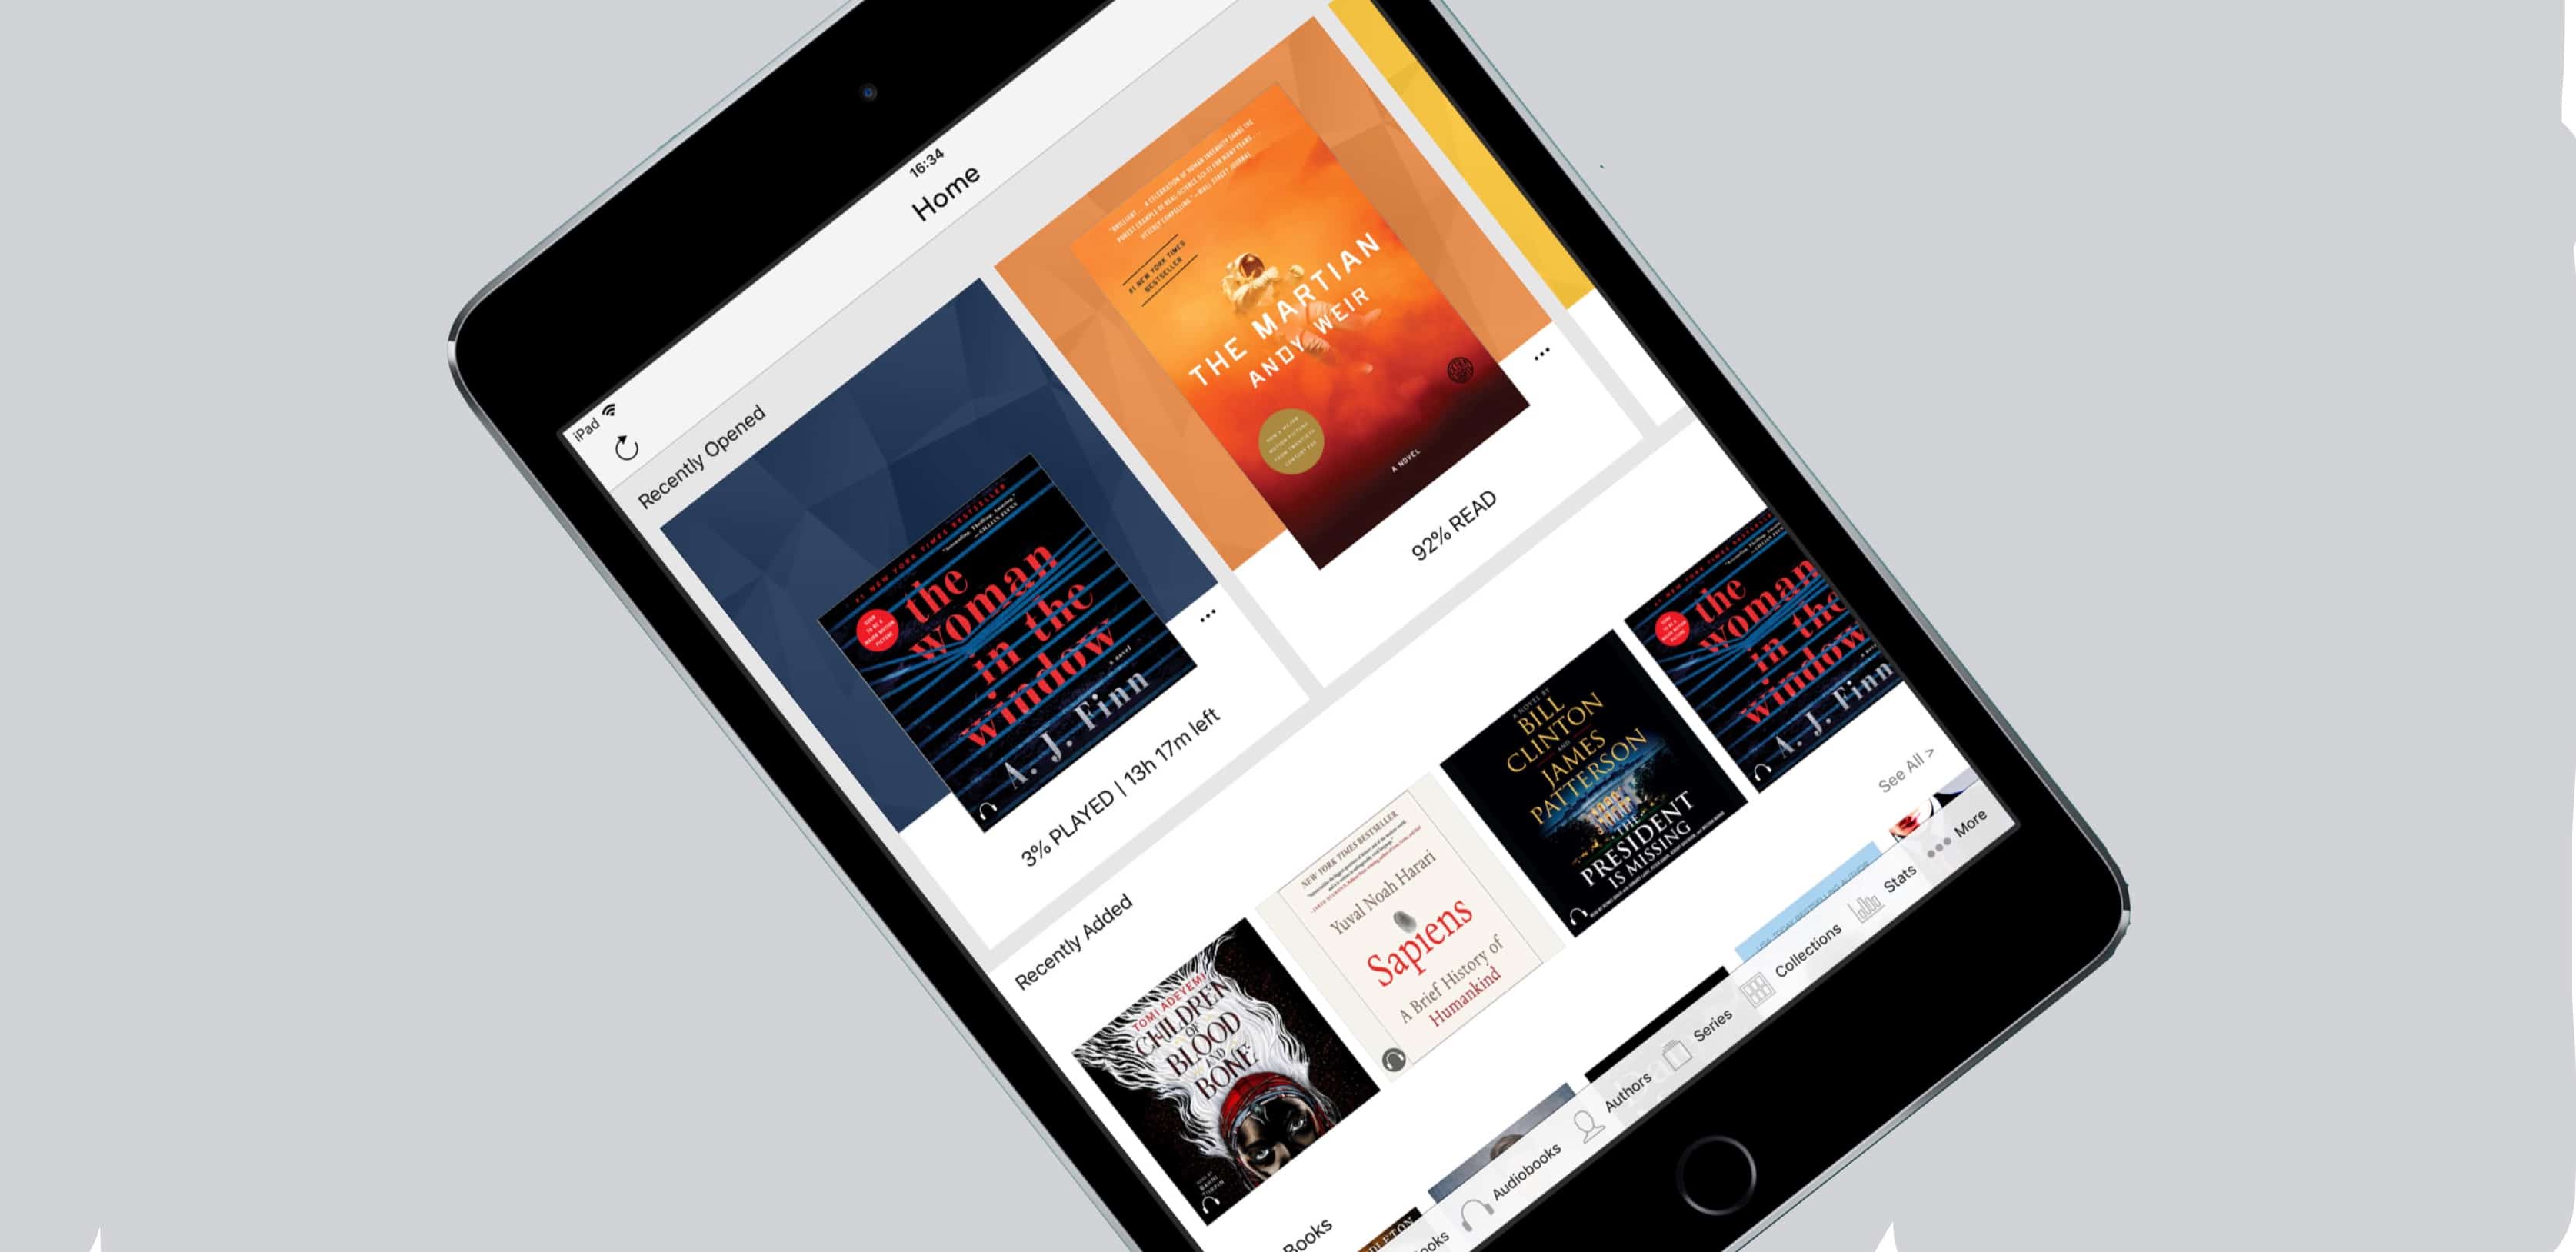 A Walmart eBooks iOS app just launched, hoping to take on the established leaders in the market.